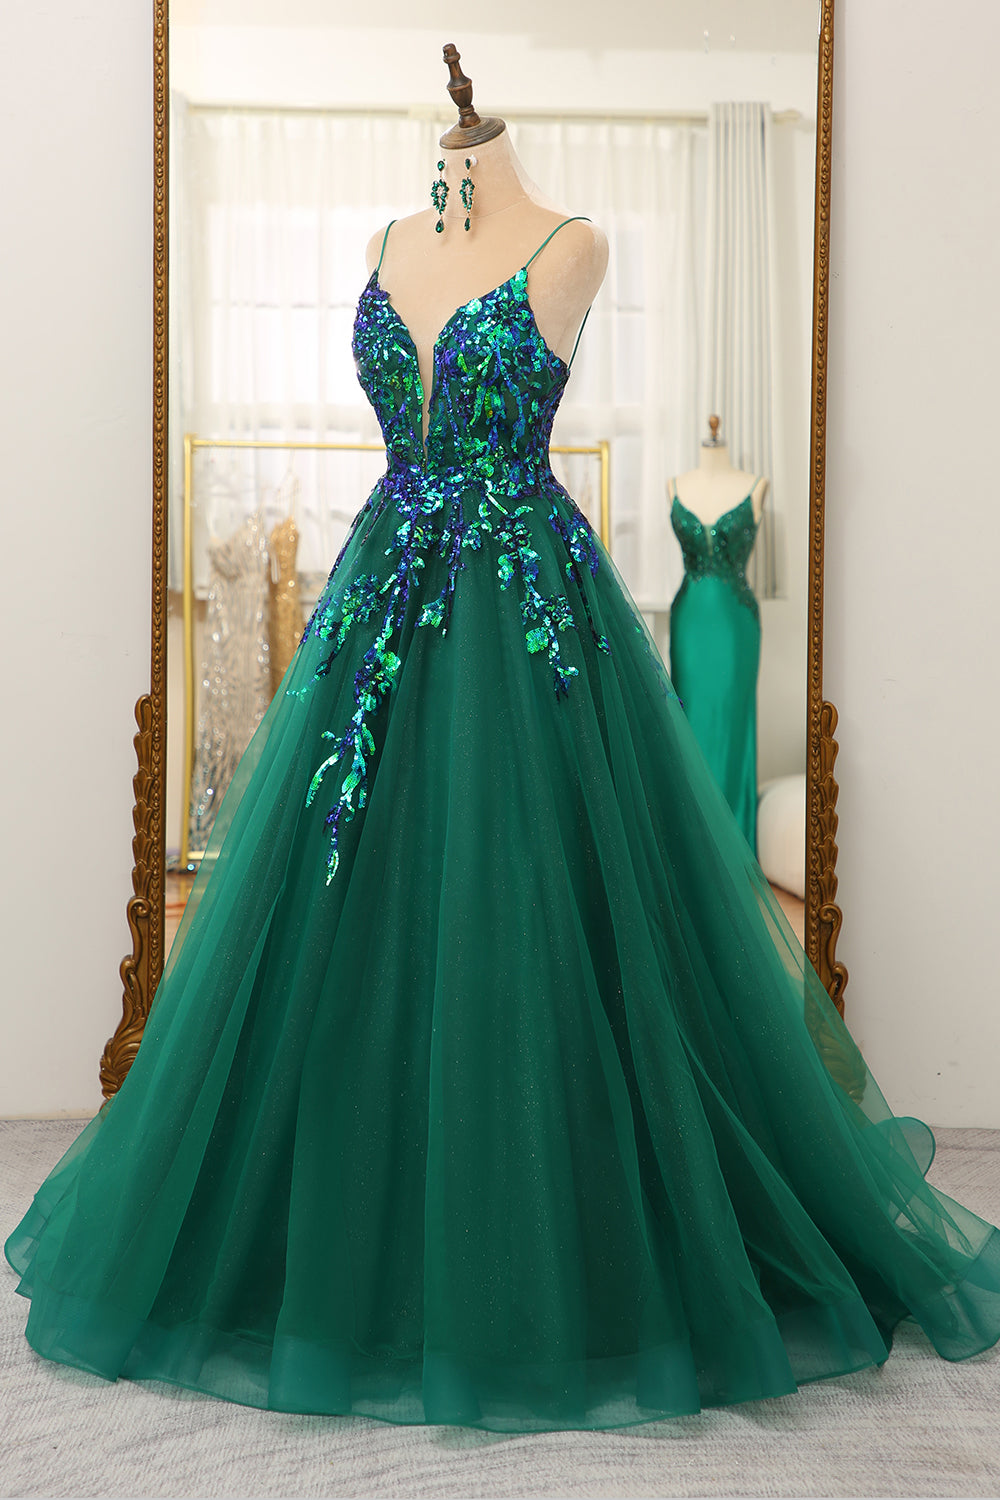 Glitter Dark Green A-Line Tulle Spaghetti Straps Long Corset Prom Dress With Sequin Gowns, Maxi Dress Outfit